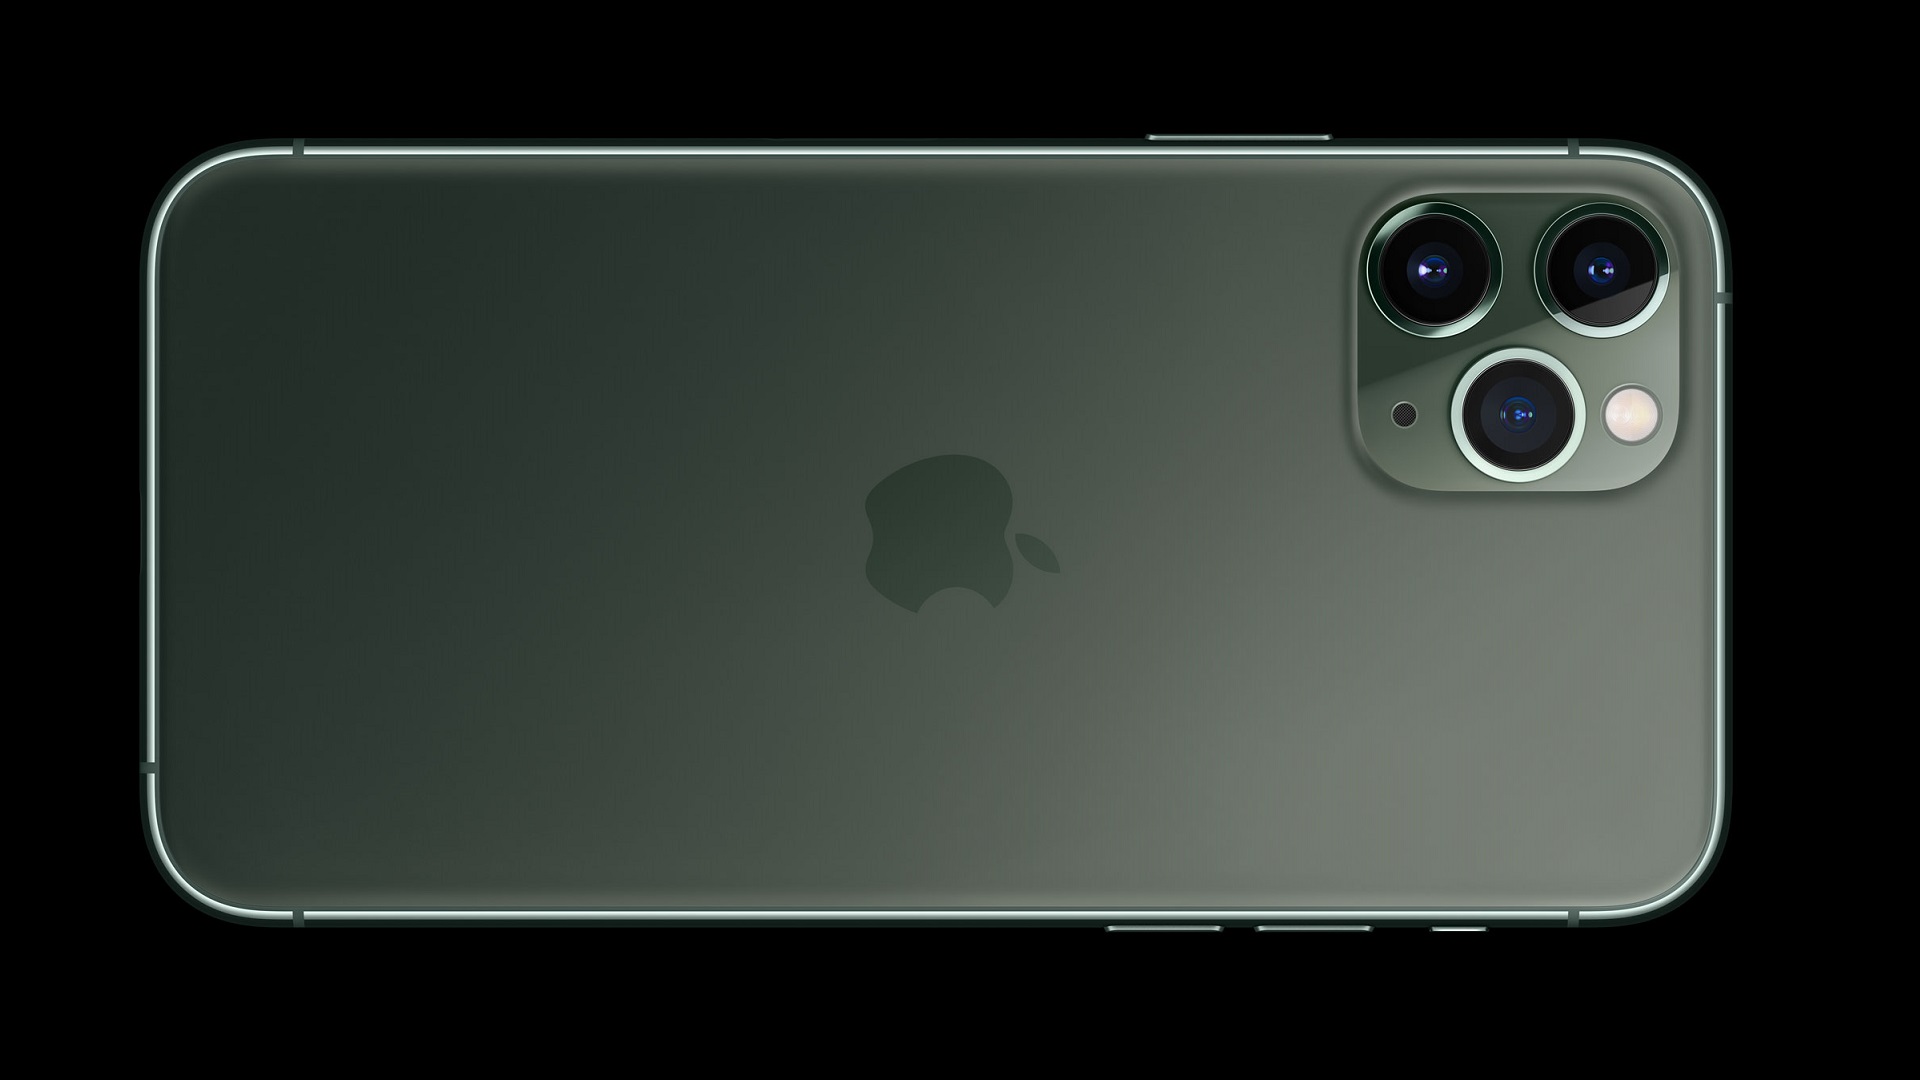 Apple Iphone 11 Pro Announced Featuring Four Cameras All